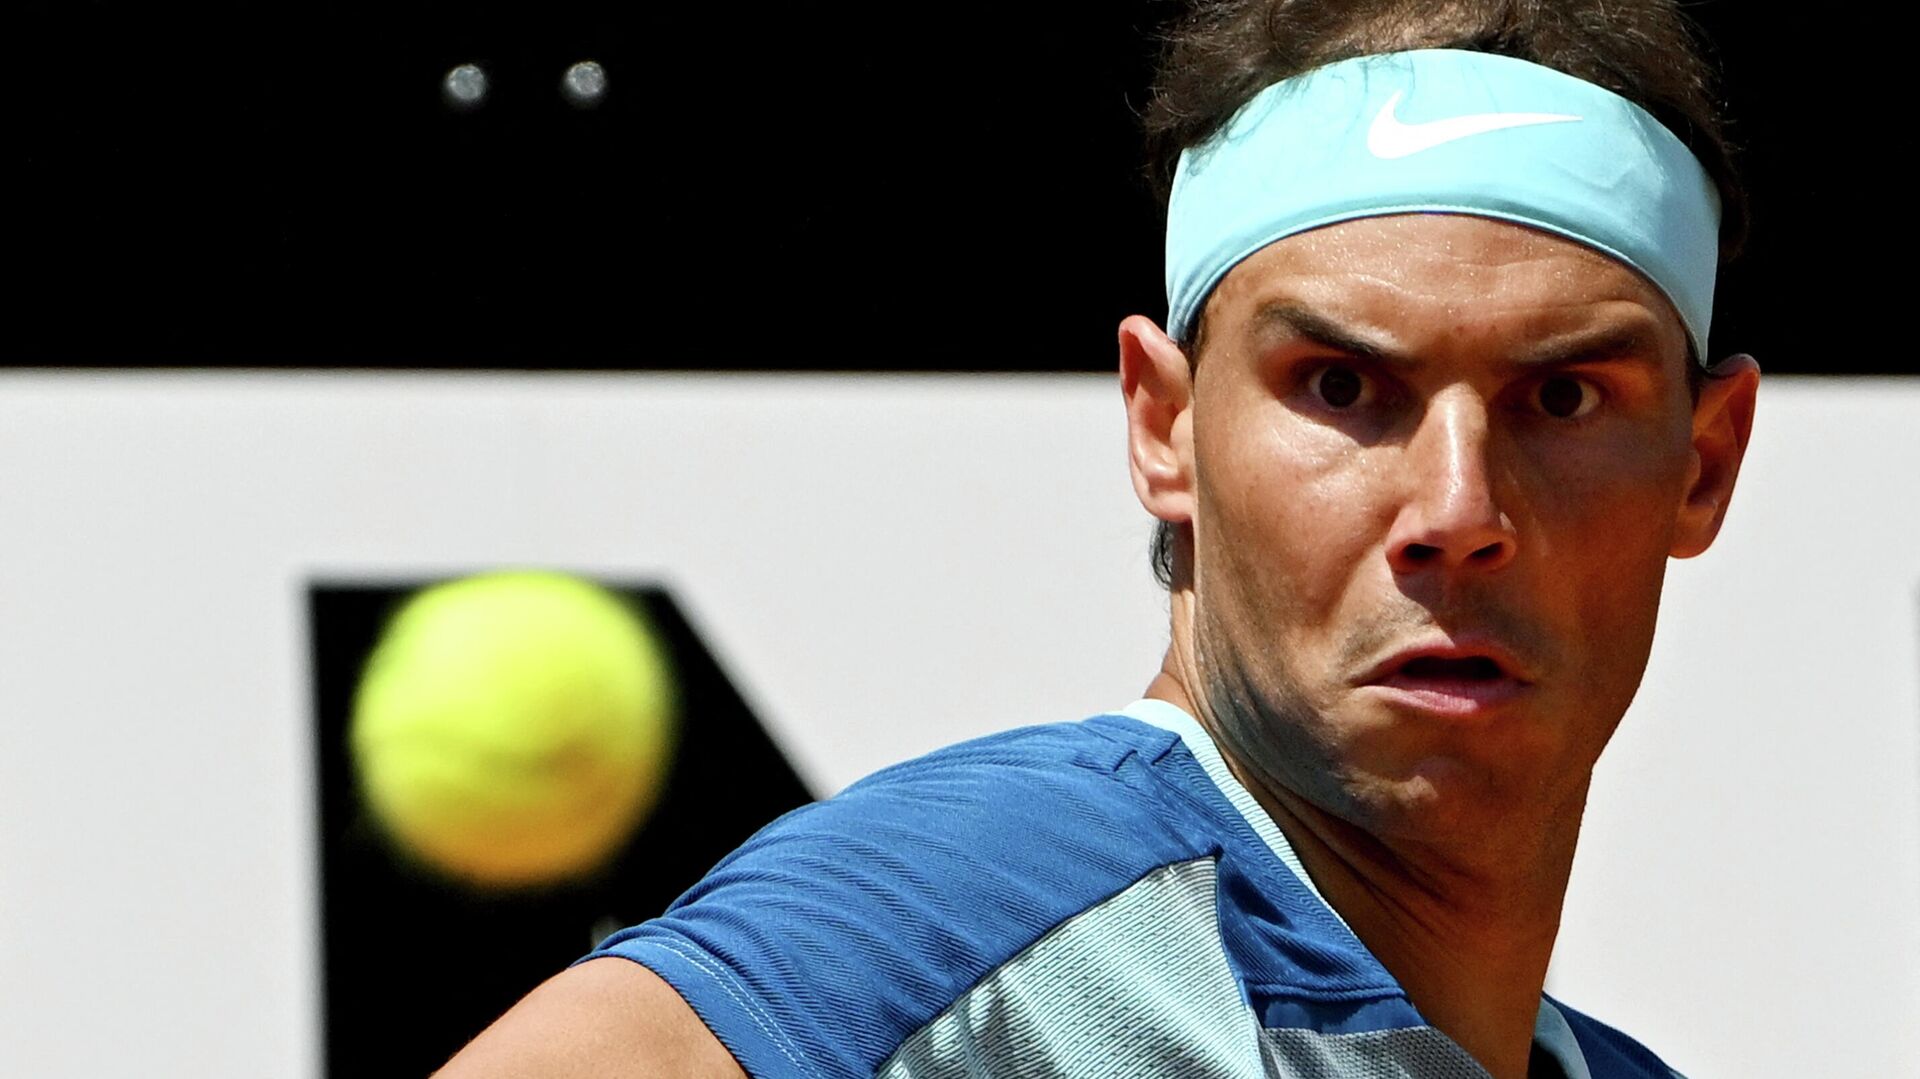 Spain's Rafael Nadal returns to USA's John Isner during their first round match at the ATP Rome Open tennis tournament on May 11, 2022 at Foro Italico in Rome - Sputnik International, 1920, 12.05.2022